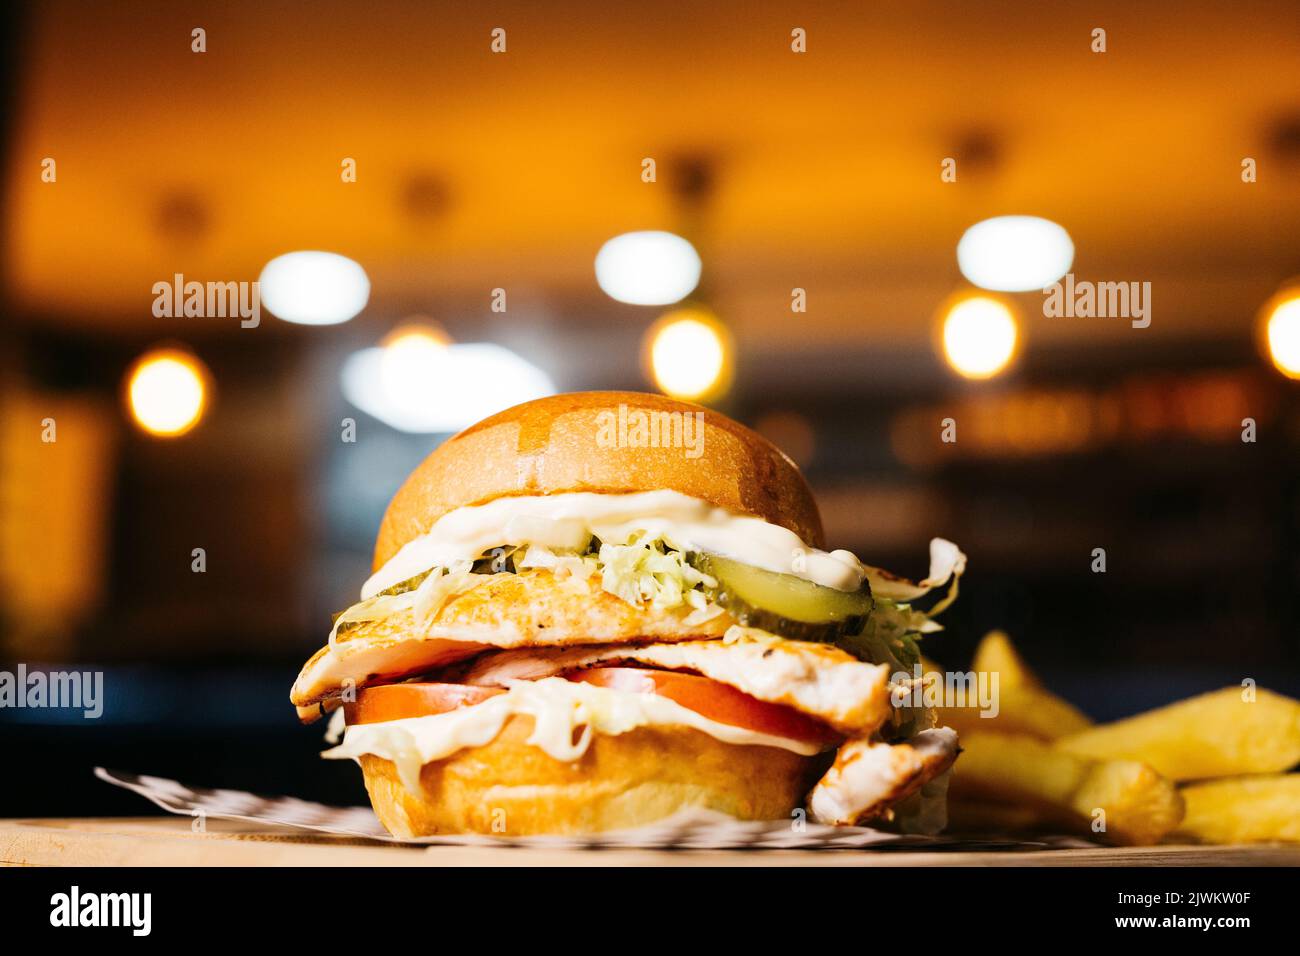 Close up of a chicken burger with cheese on a wooden table in a restaurant Stock Photo